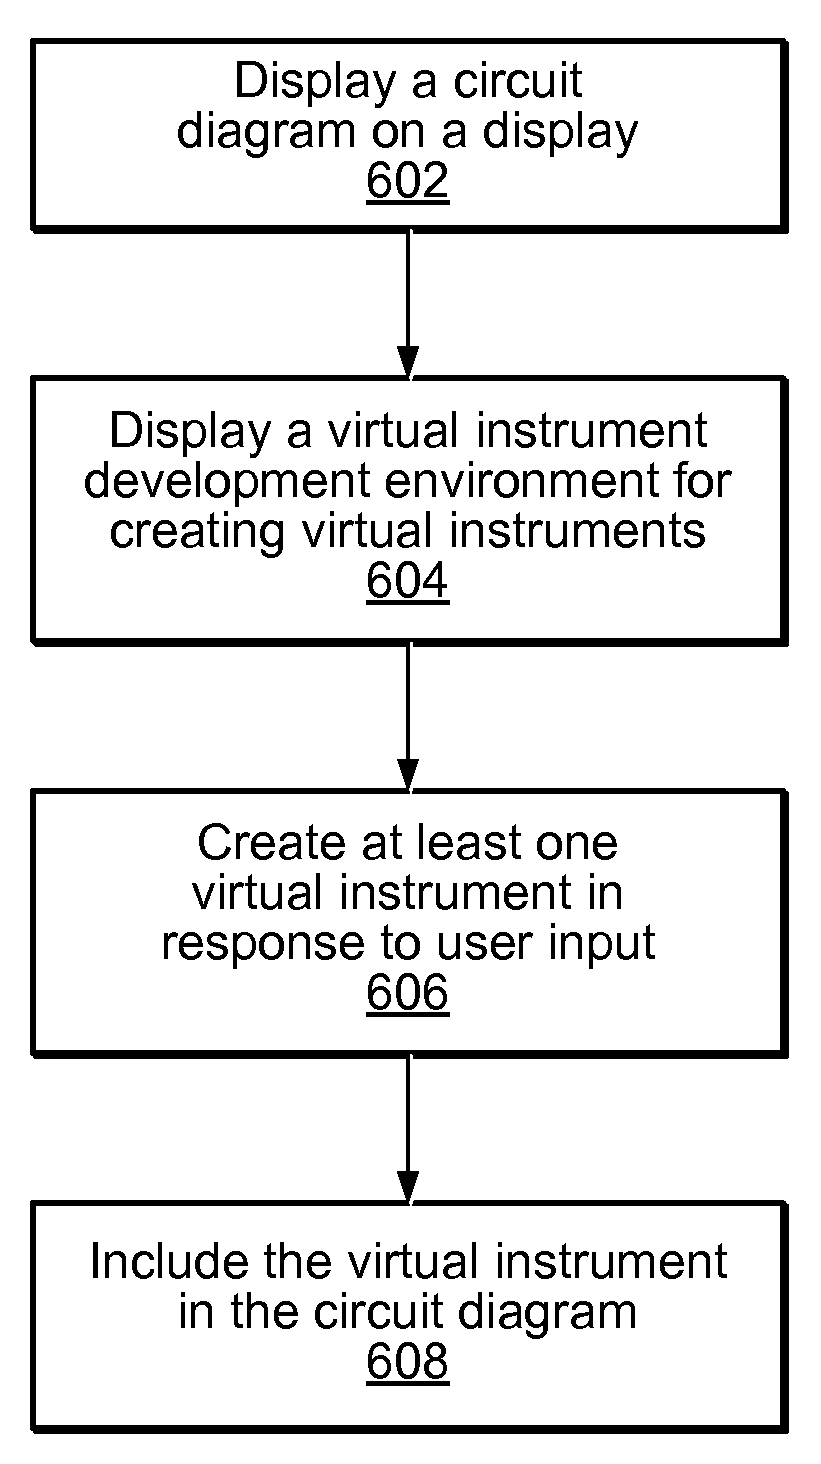 User Defined Virtual Instruments in a Simulation Environment